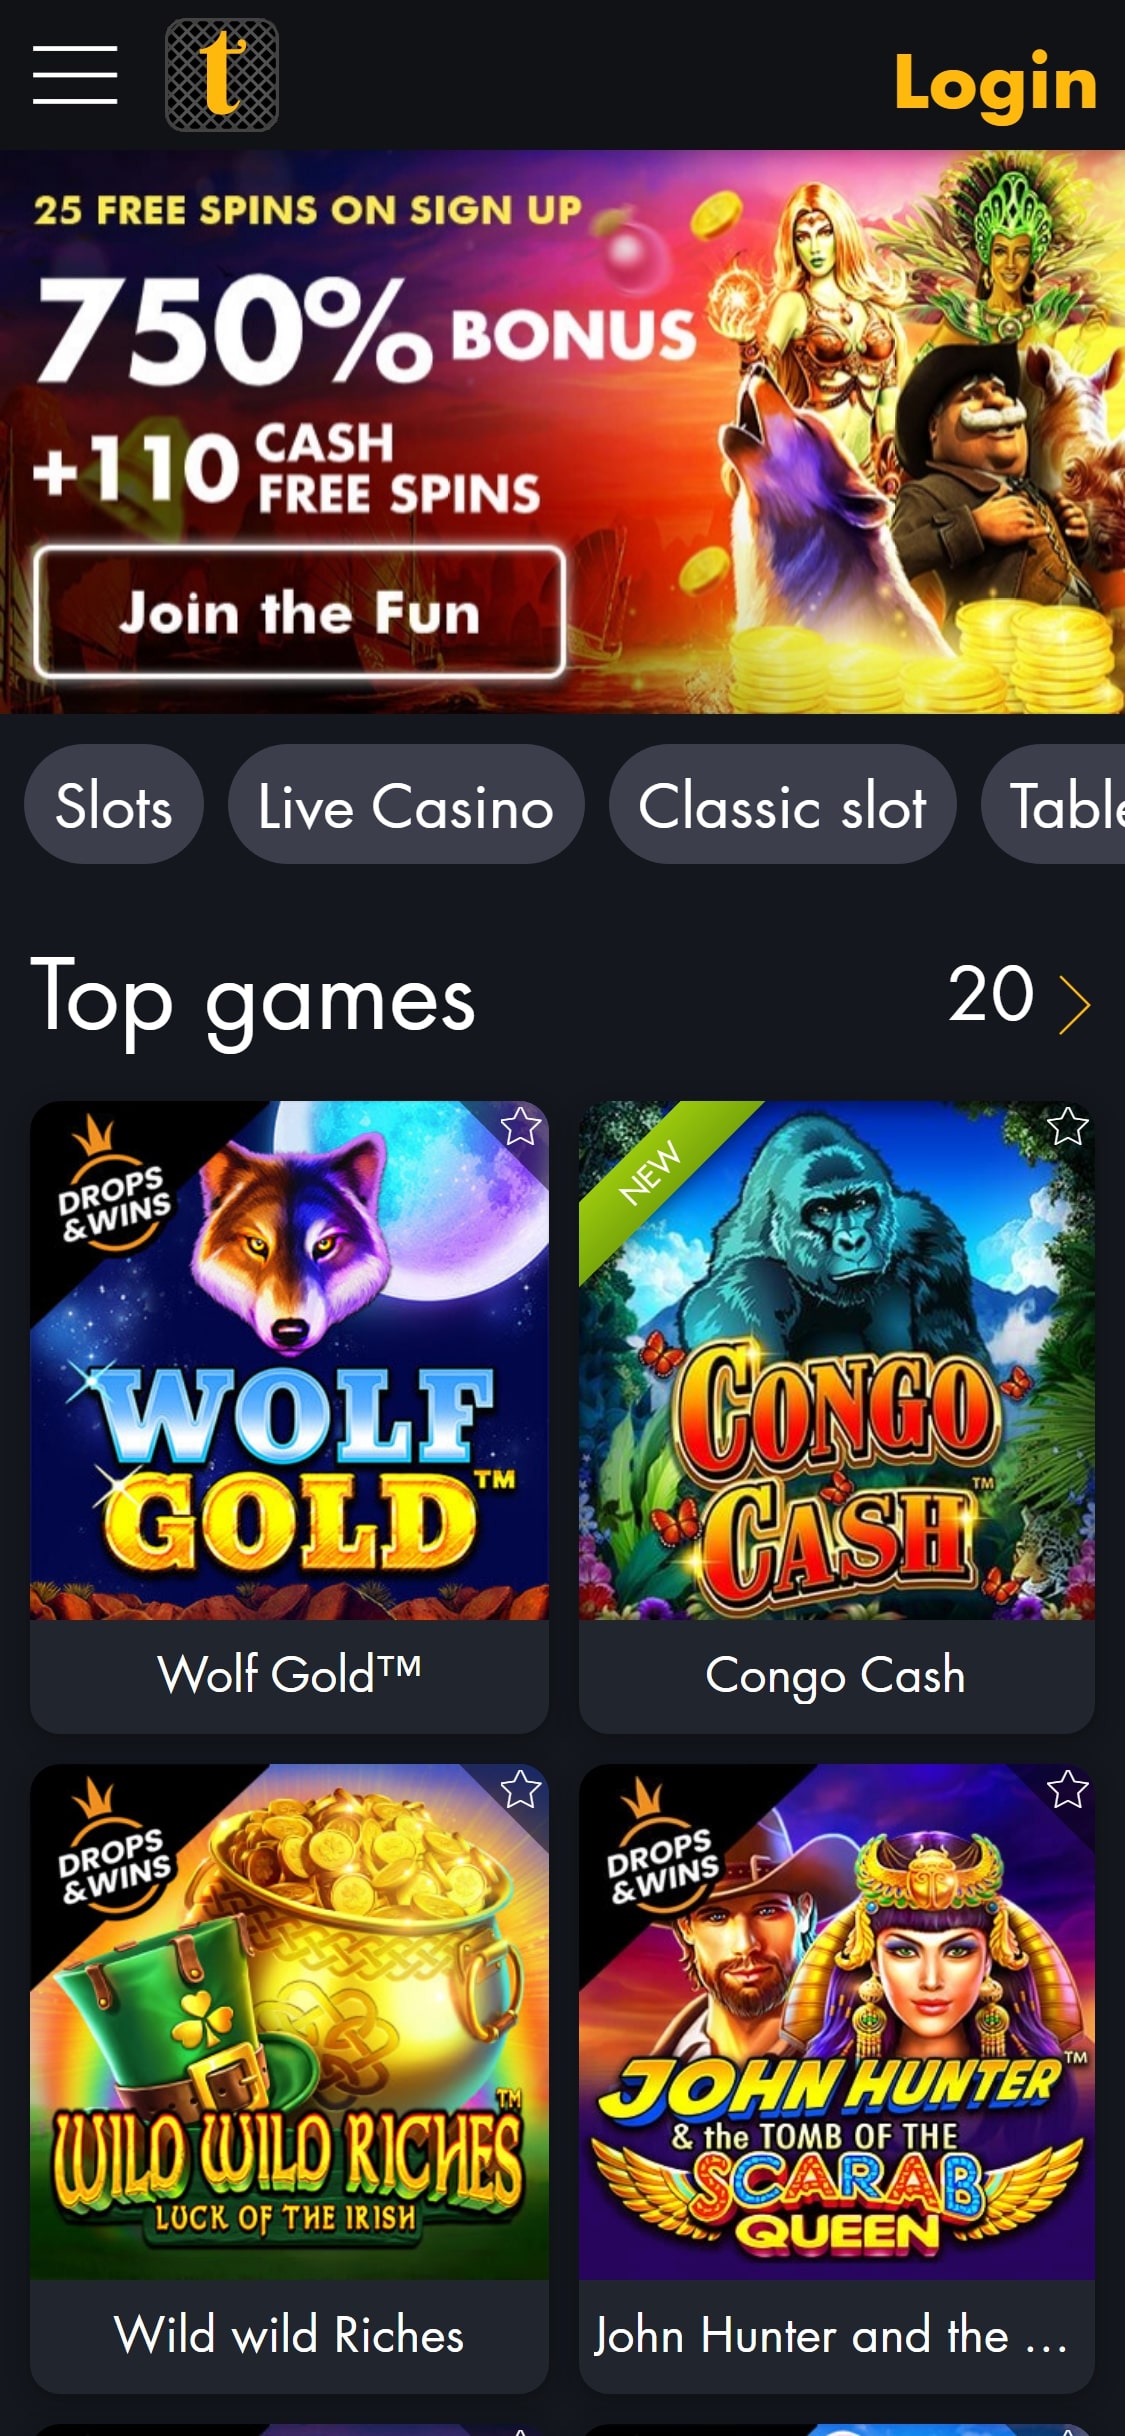 Tangiers Casino Mobile Review